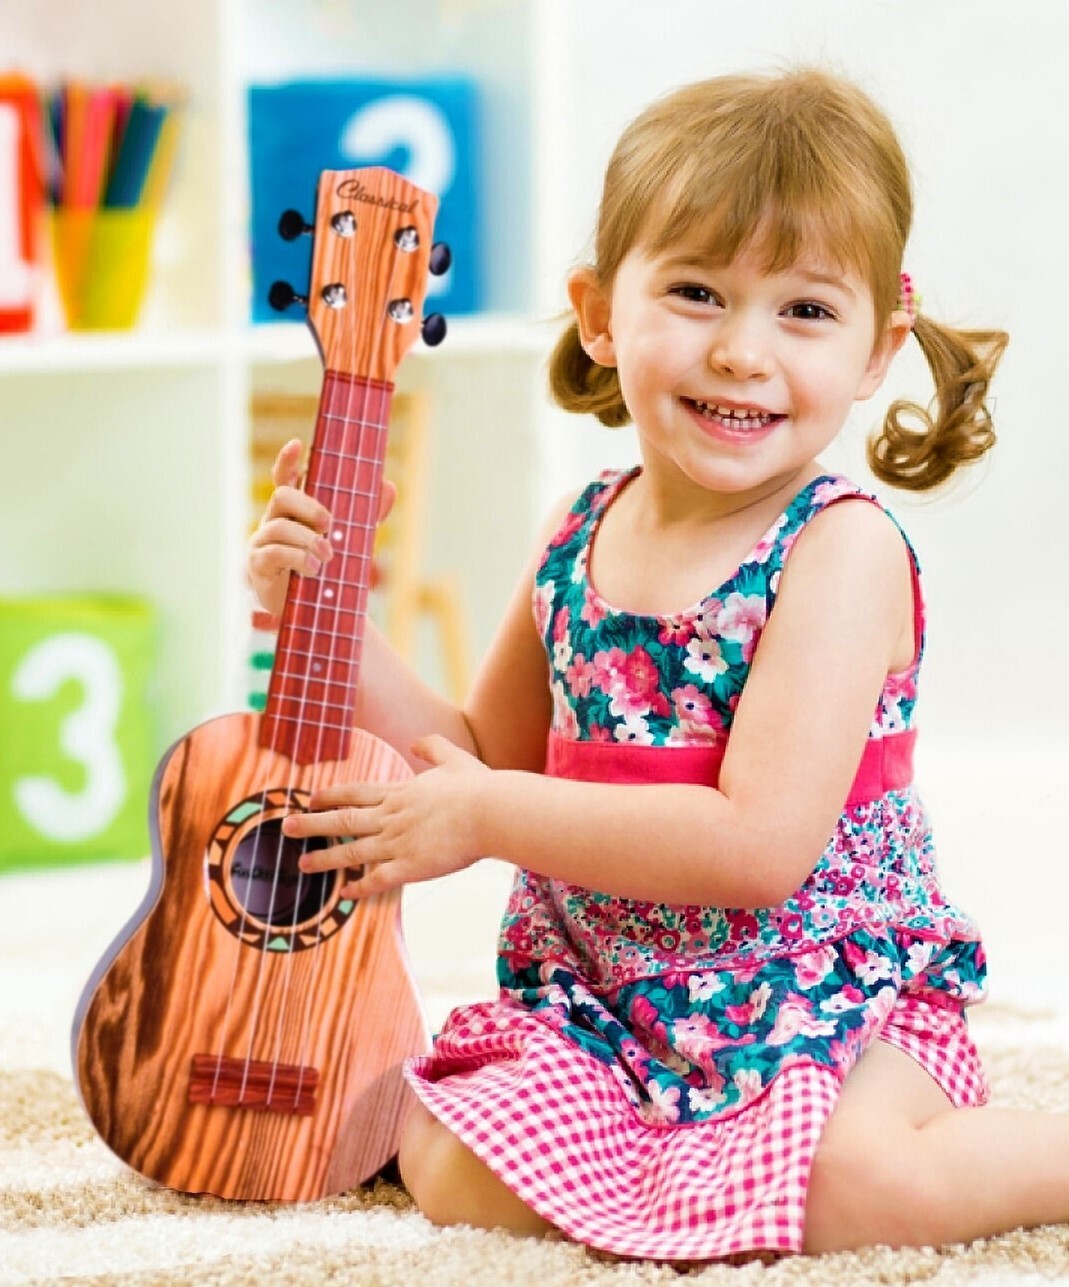 Fun Little Toys 21 Inch Toy Guitar Ukulele for Kids 